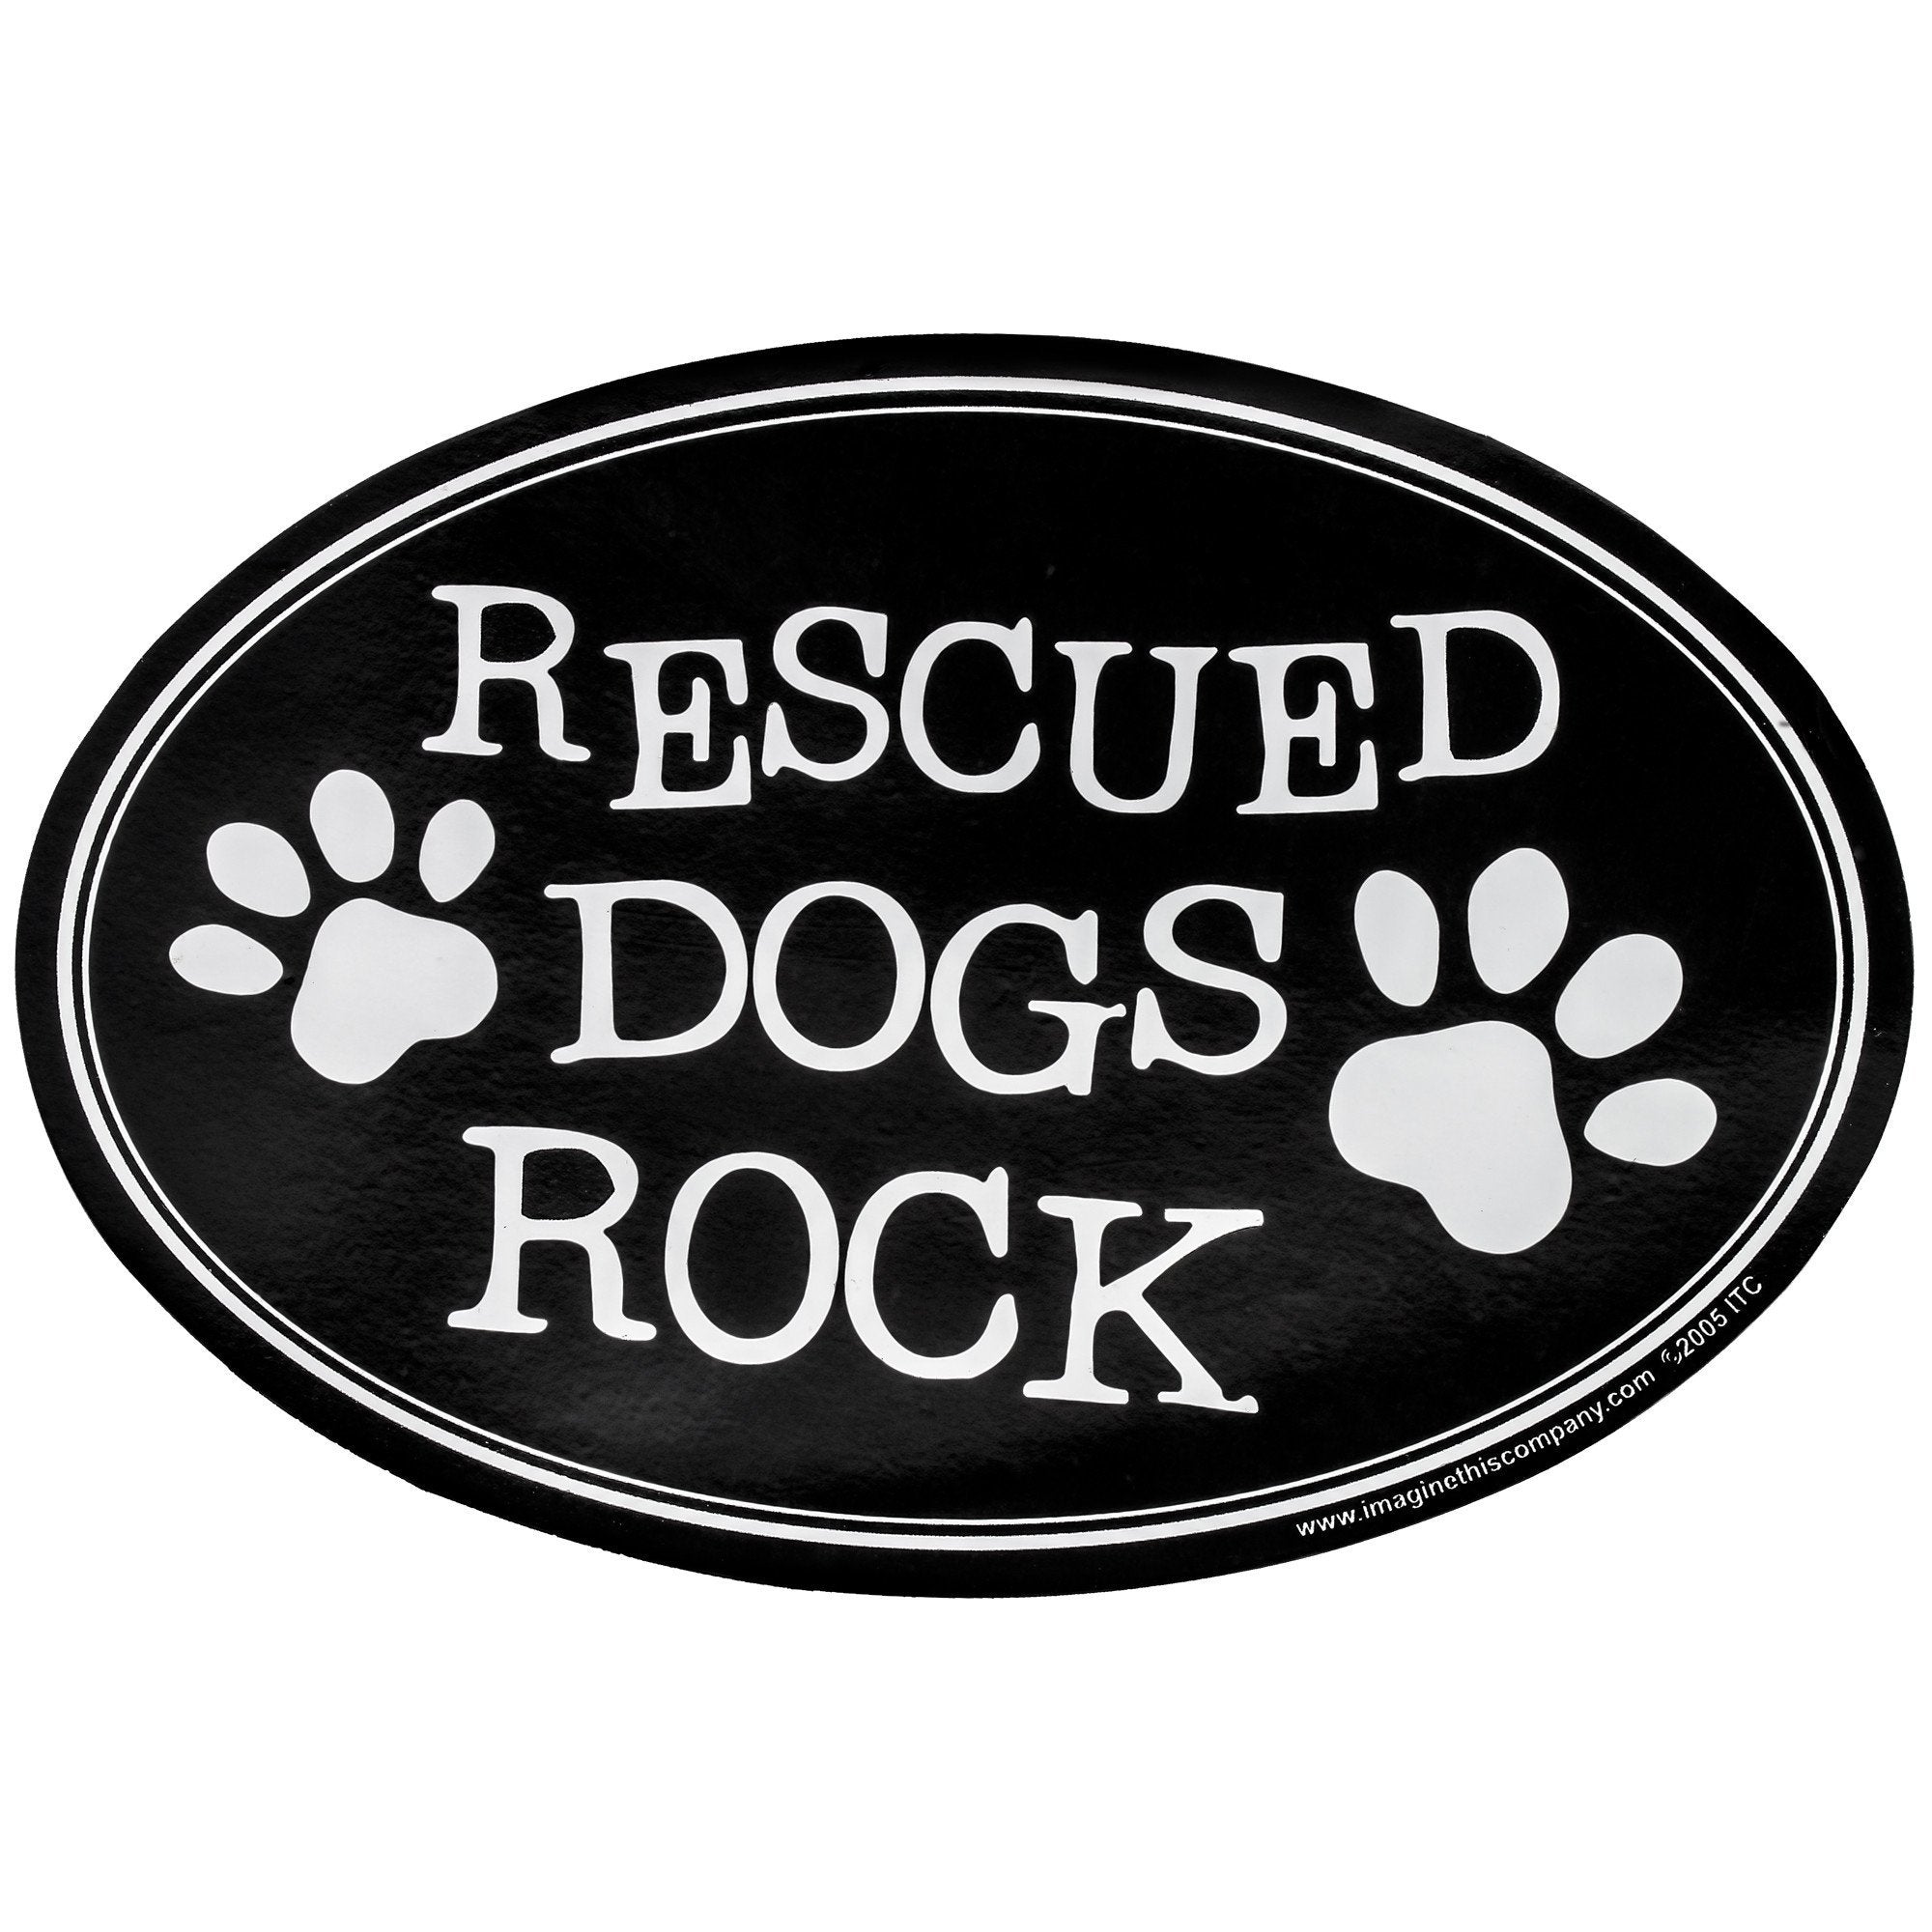 Rescued Dogs Rock Car Magnet - Single